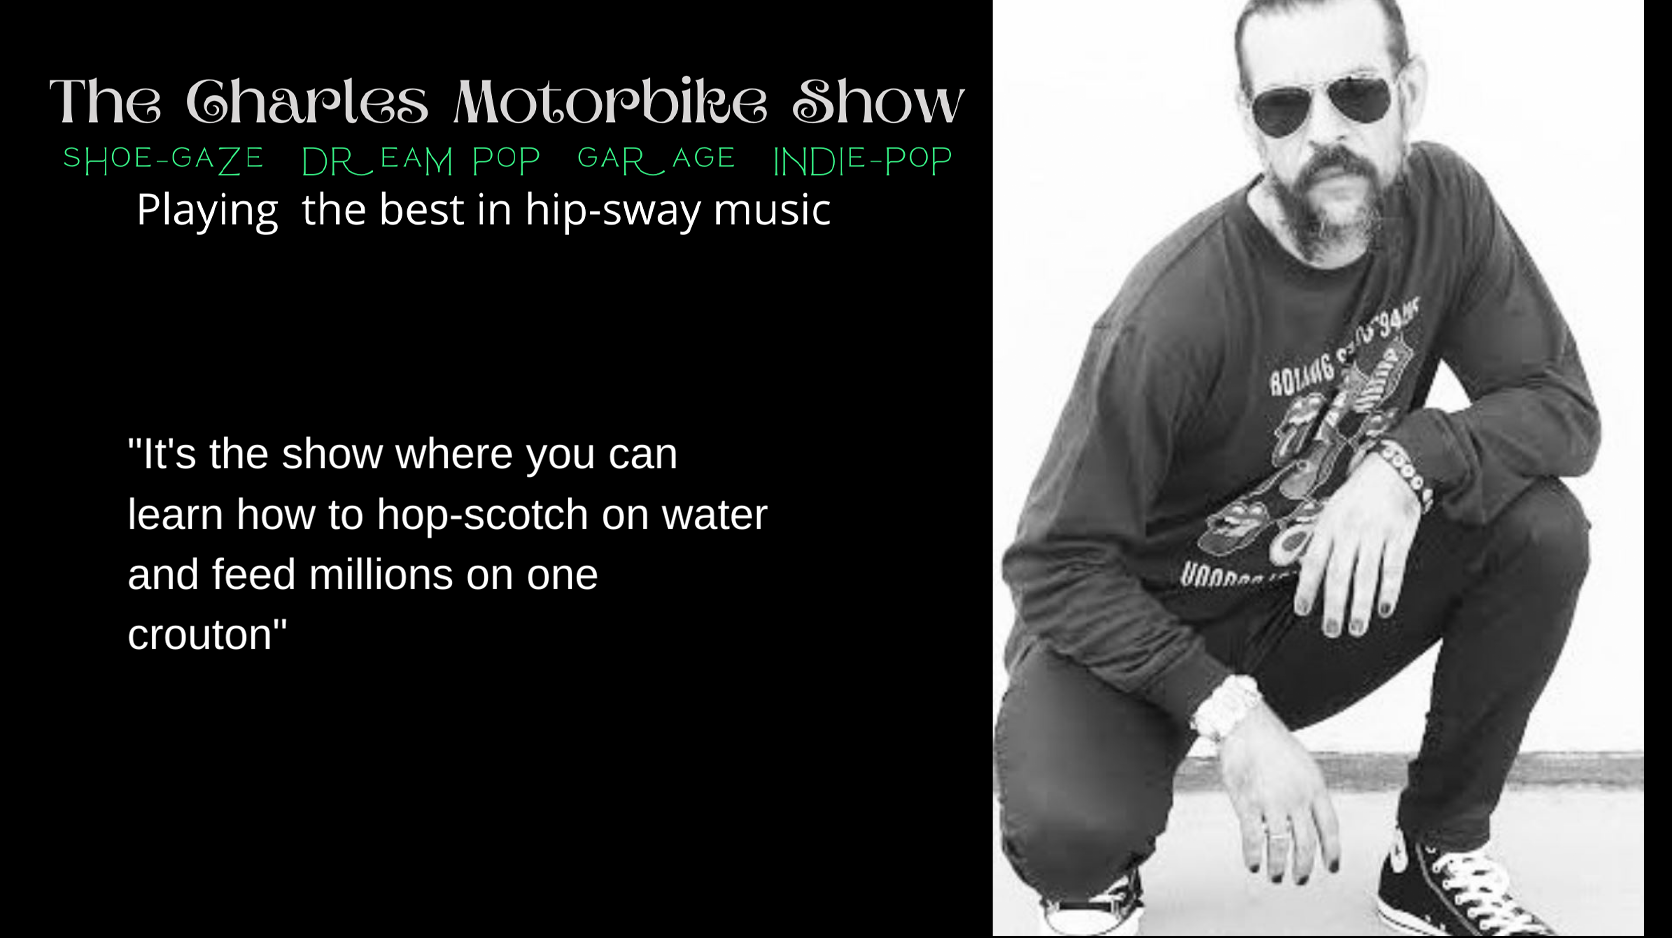 The Charles Motorbike Show: T, Thu, Sat @ 8pm PDT